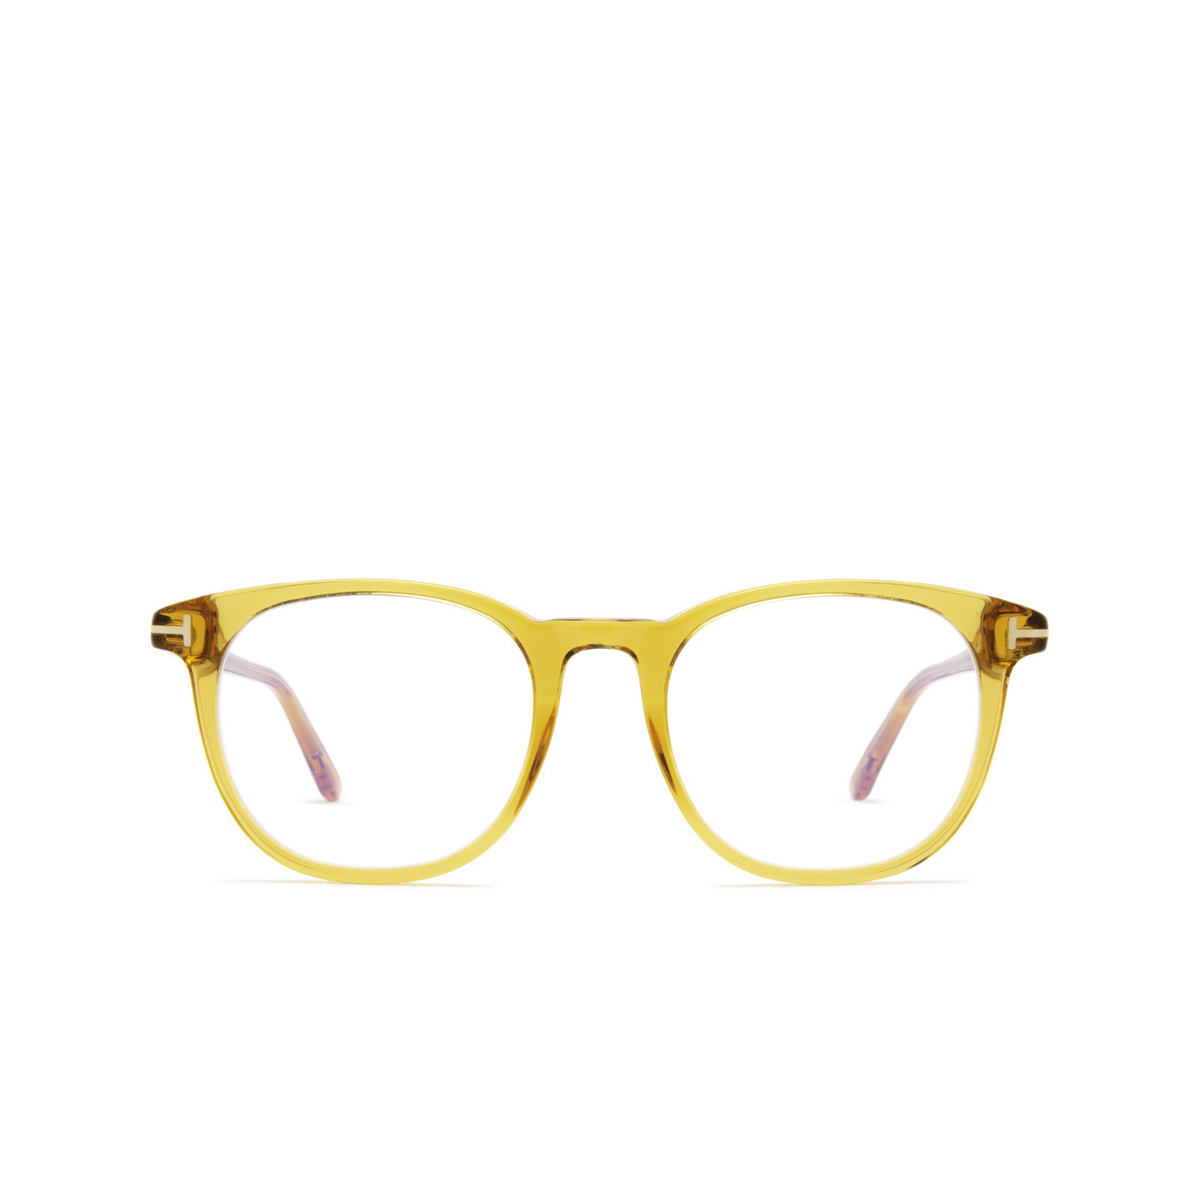 Tom Ford® Round Eyeglasses: FT5754-B color Yellow 041 - front view.